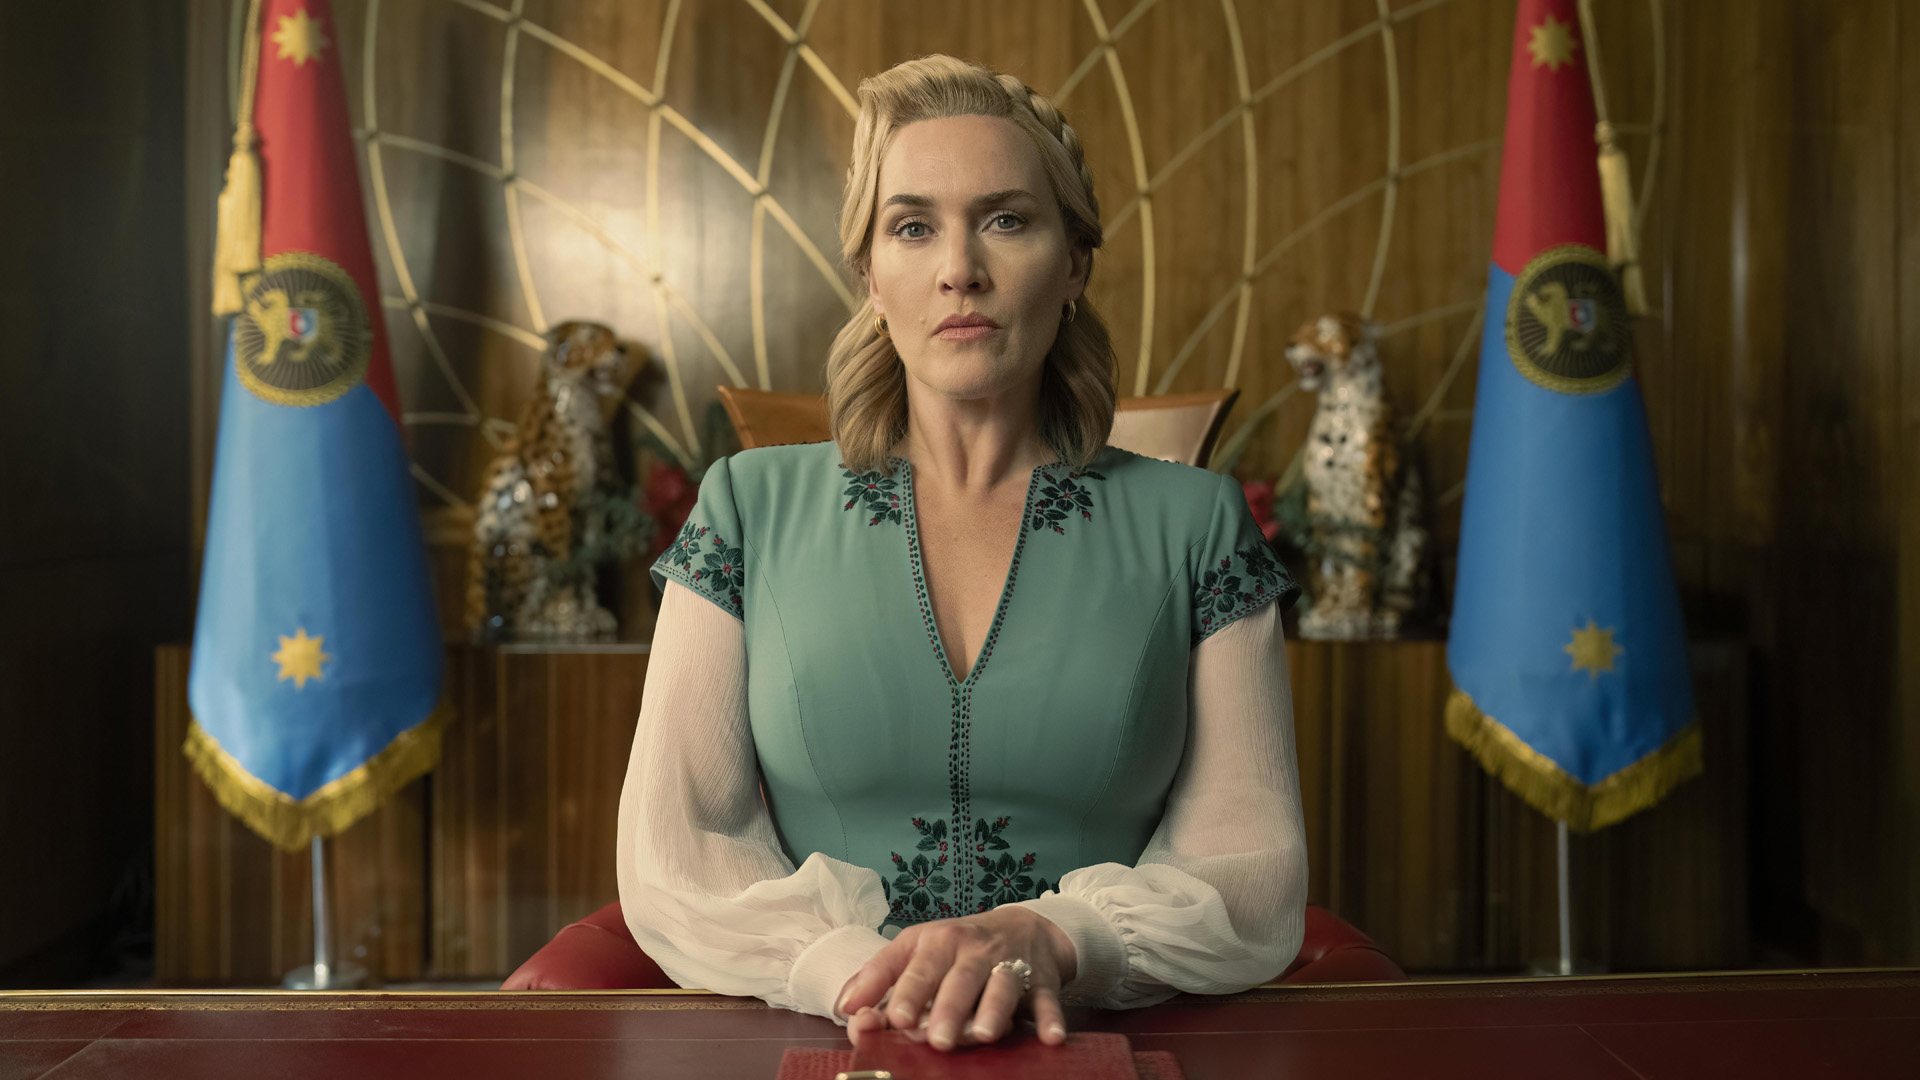 “Kate Winslet should have closed the pages a long time ago.”